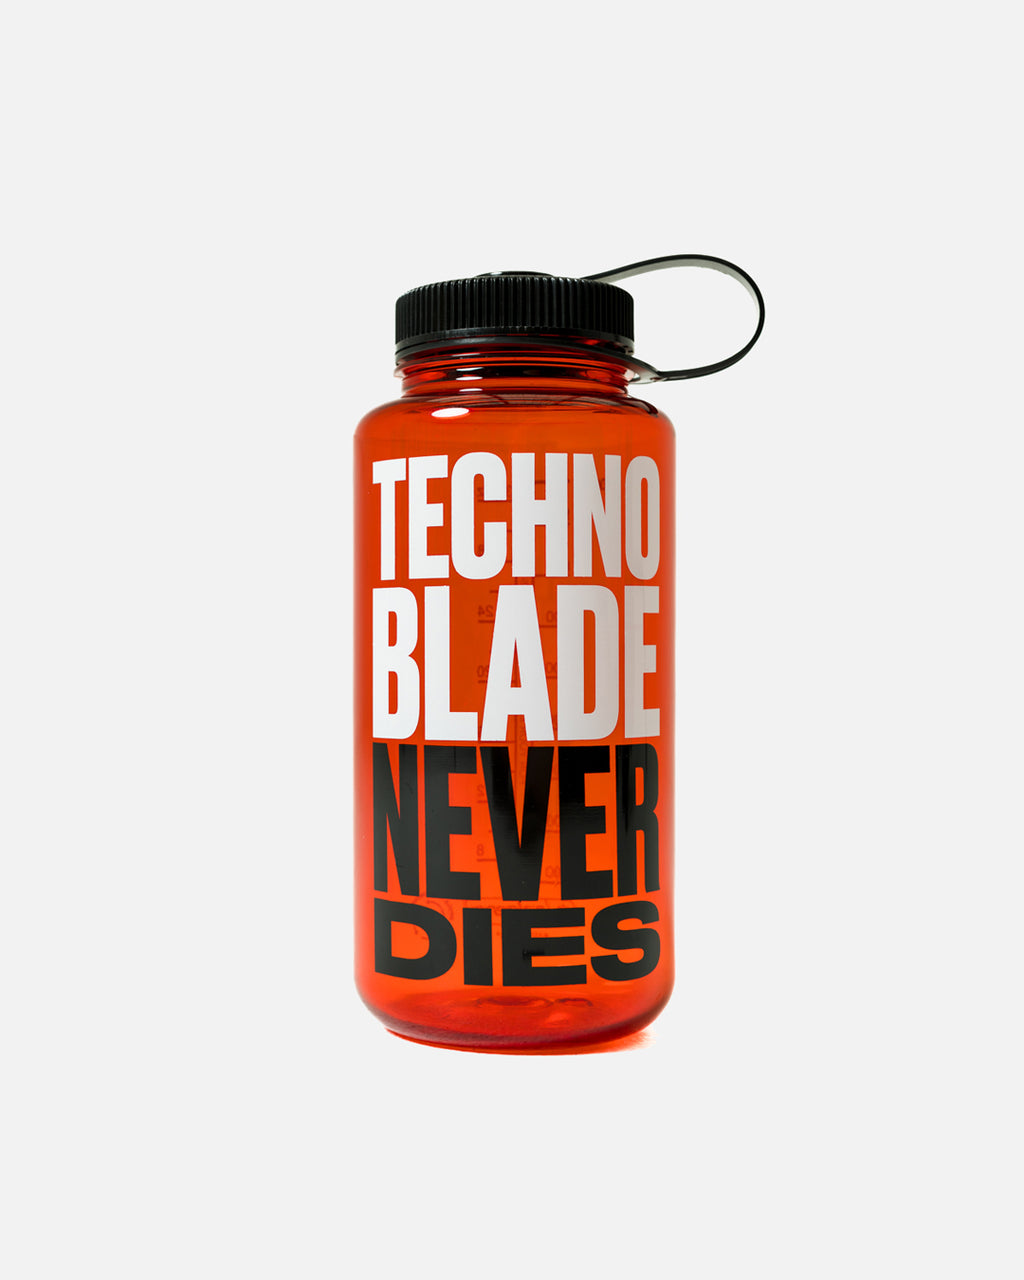 did you mean technoblade never dies｜TikTok Search